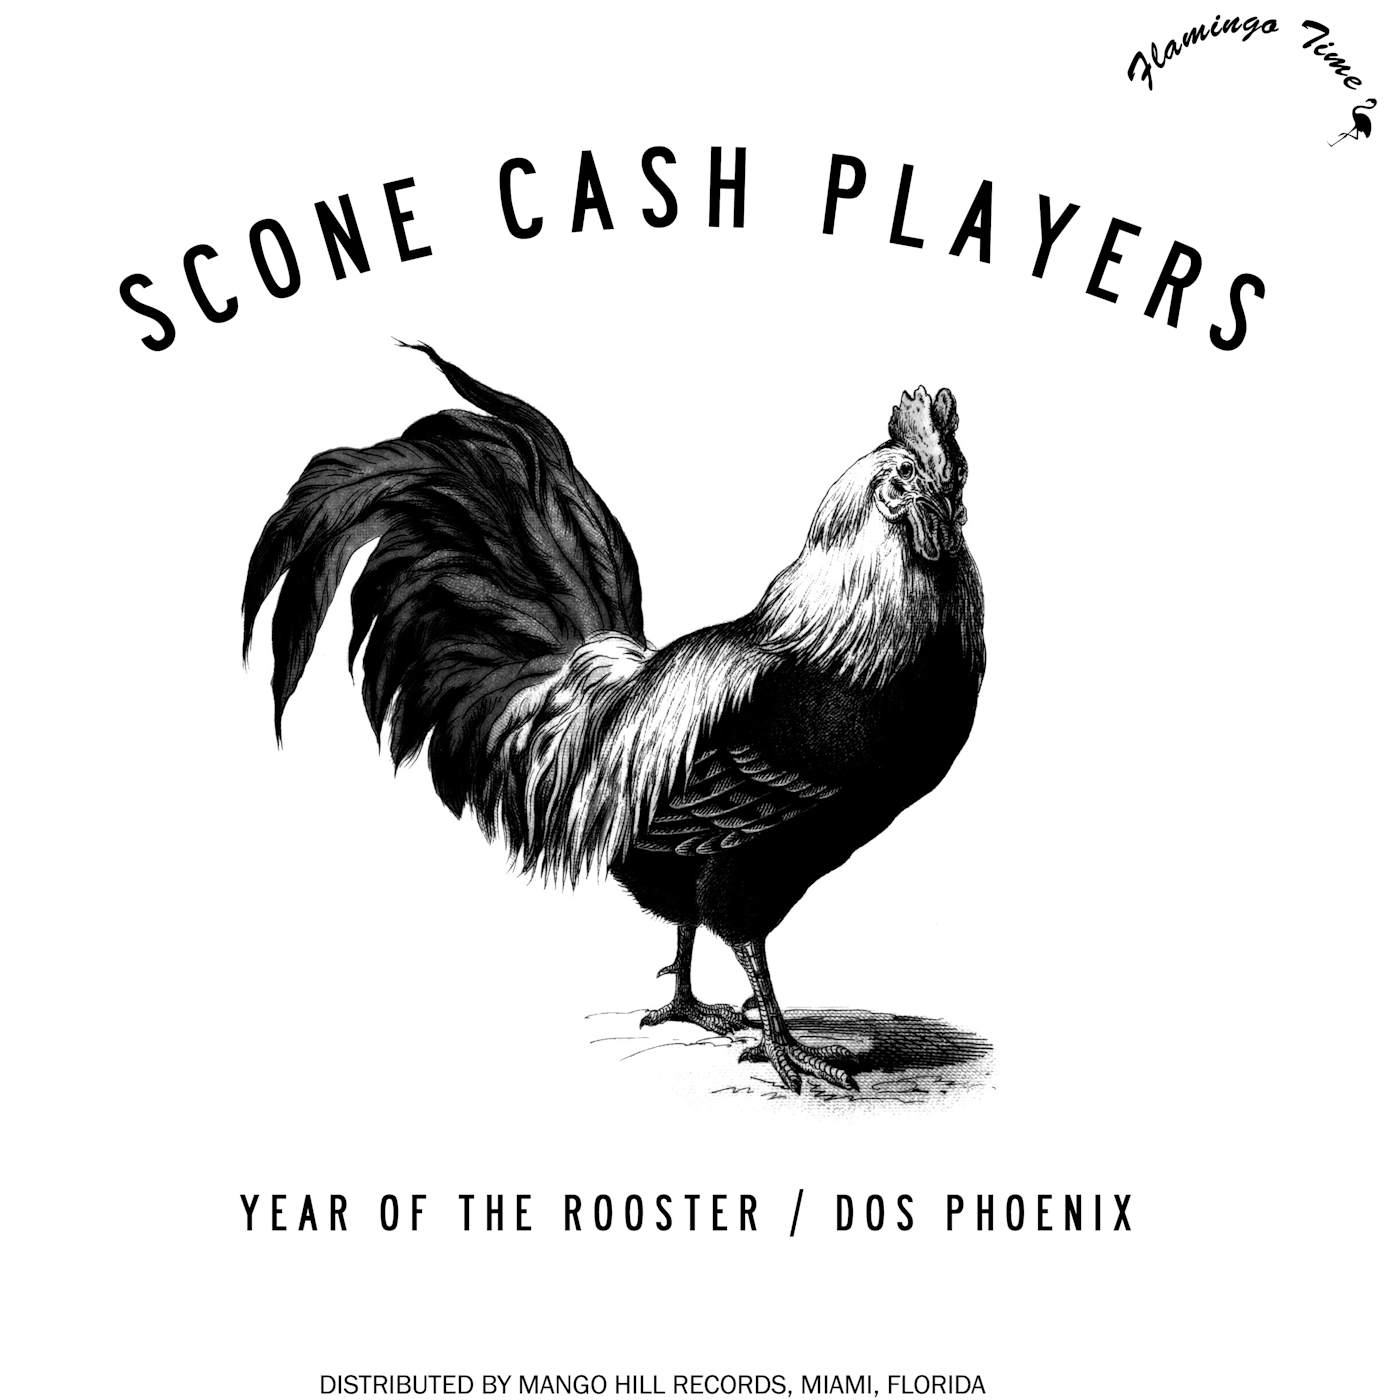 Scone Cash Players Year of the Rooster / Dos Phoenix Vinyl Record